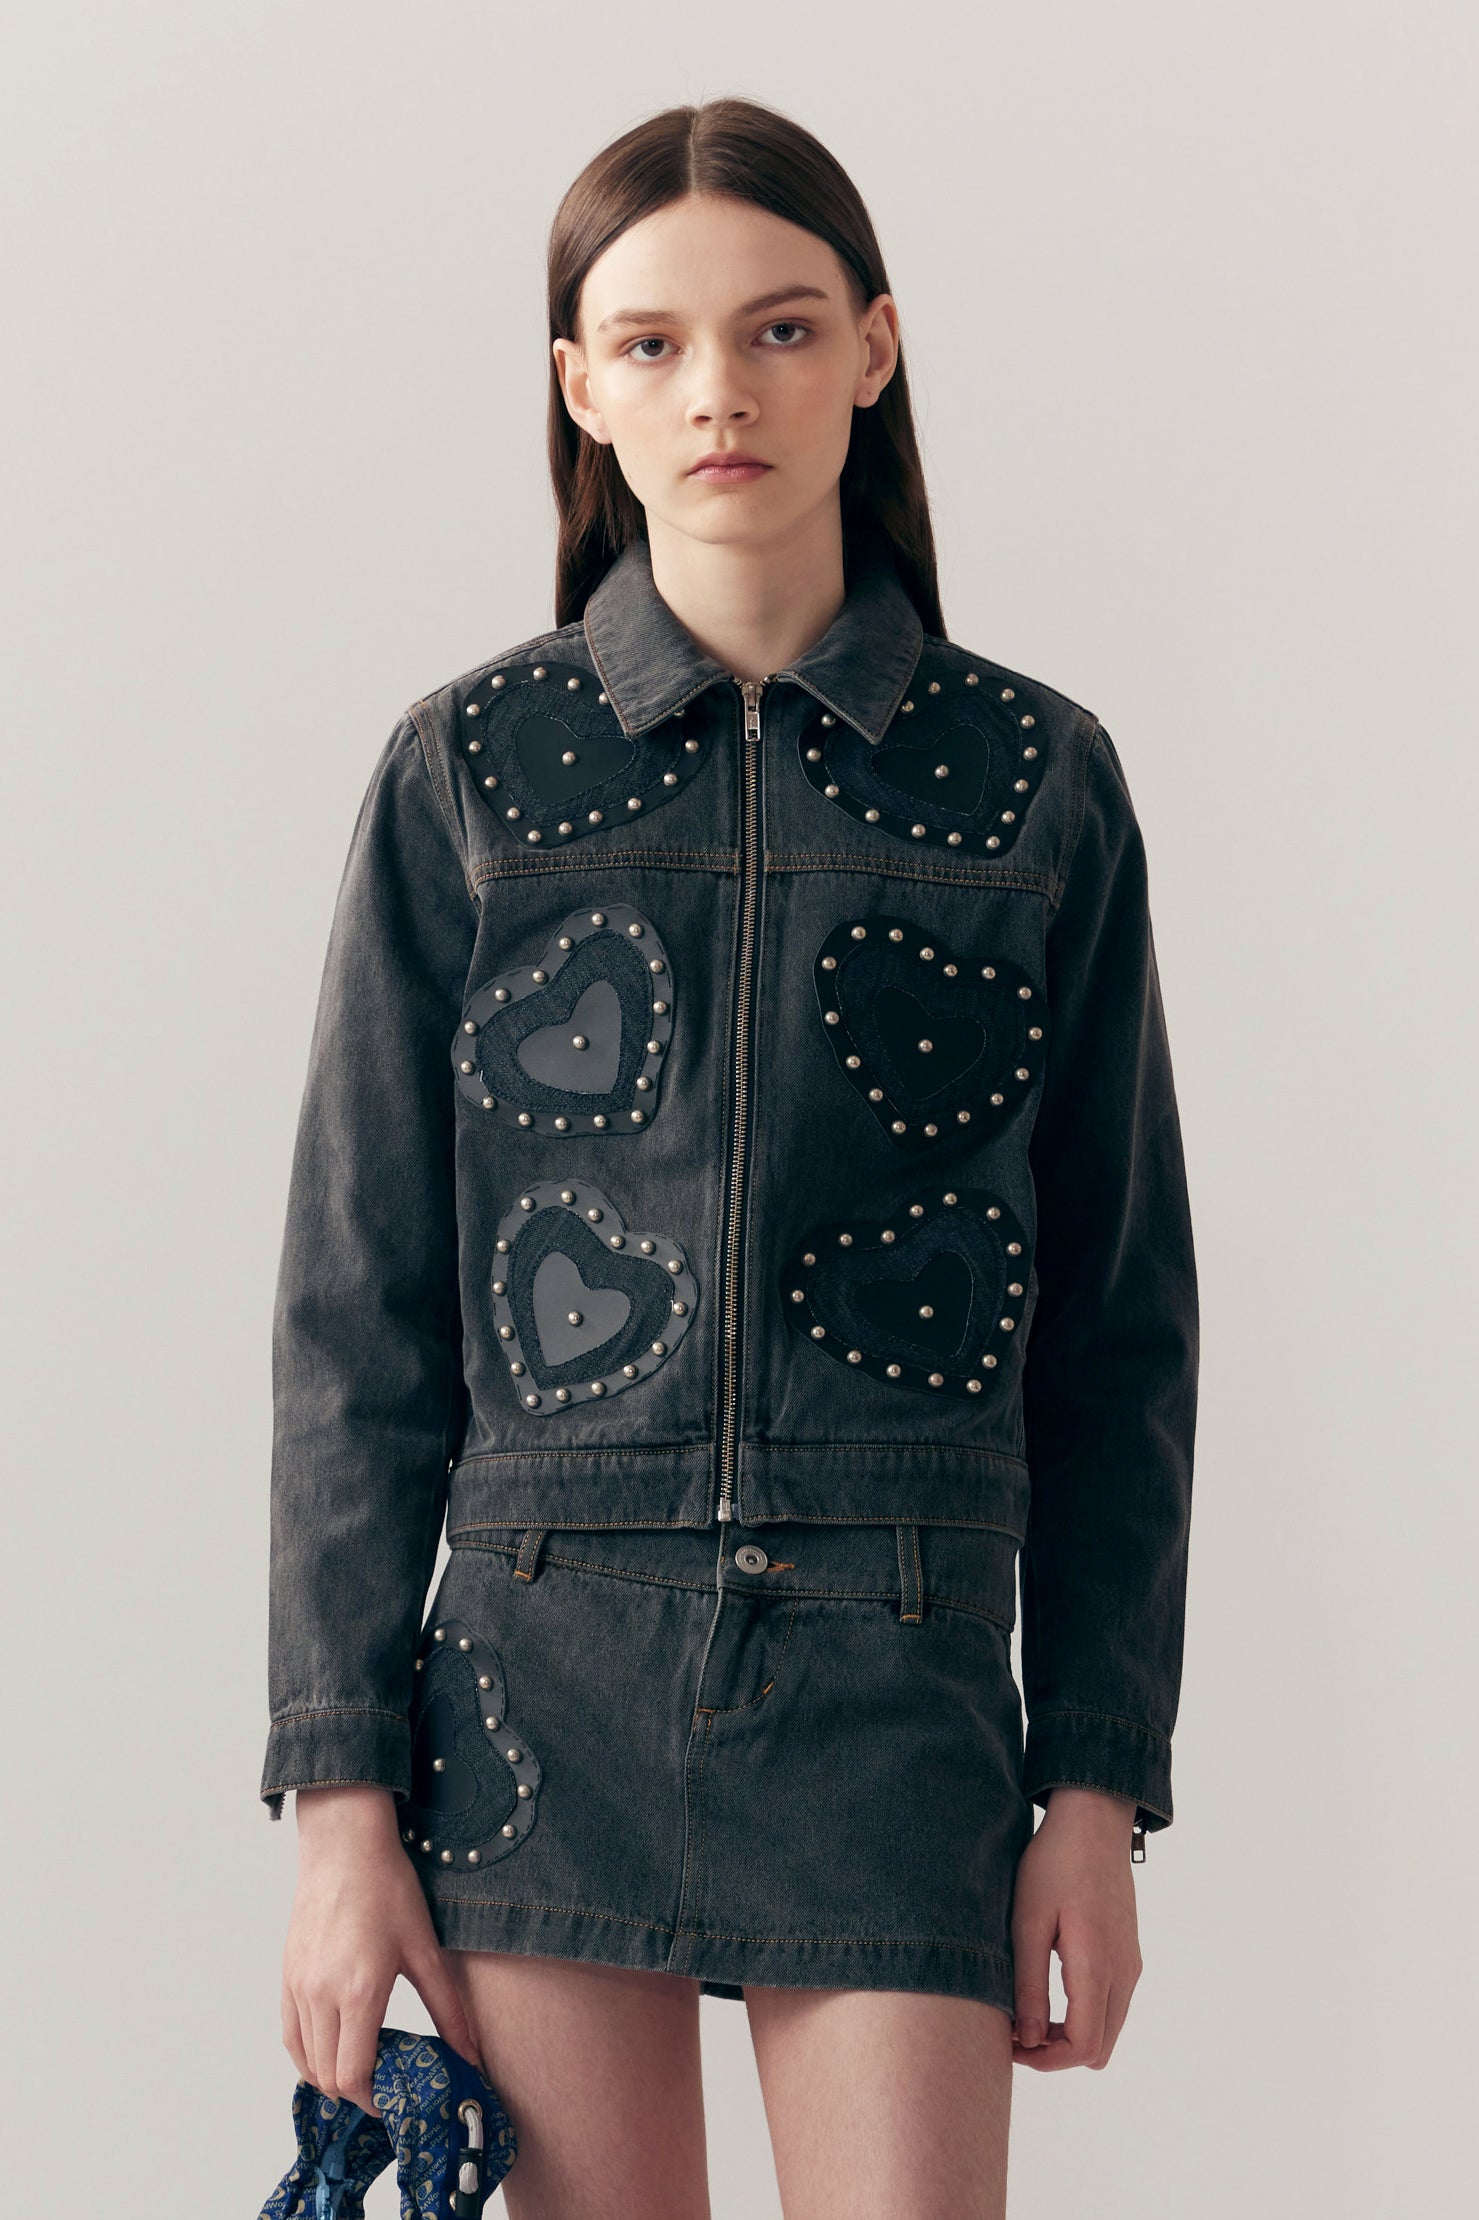 The HEARTS PATCH DENIM JACKET  available online with global shipping, and in PAM Stores Melbourne and Sydney.